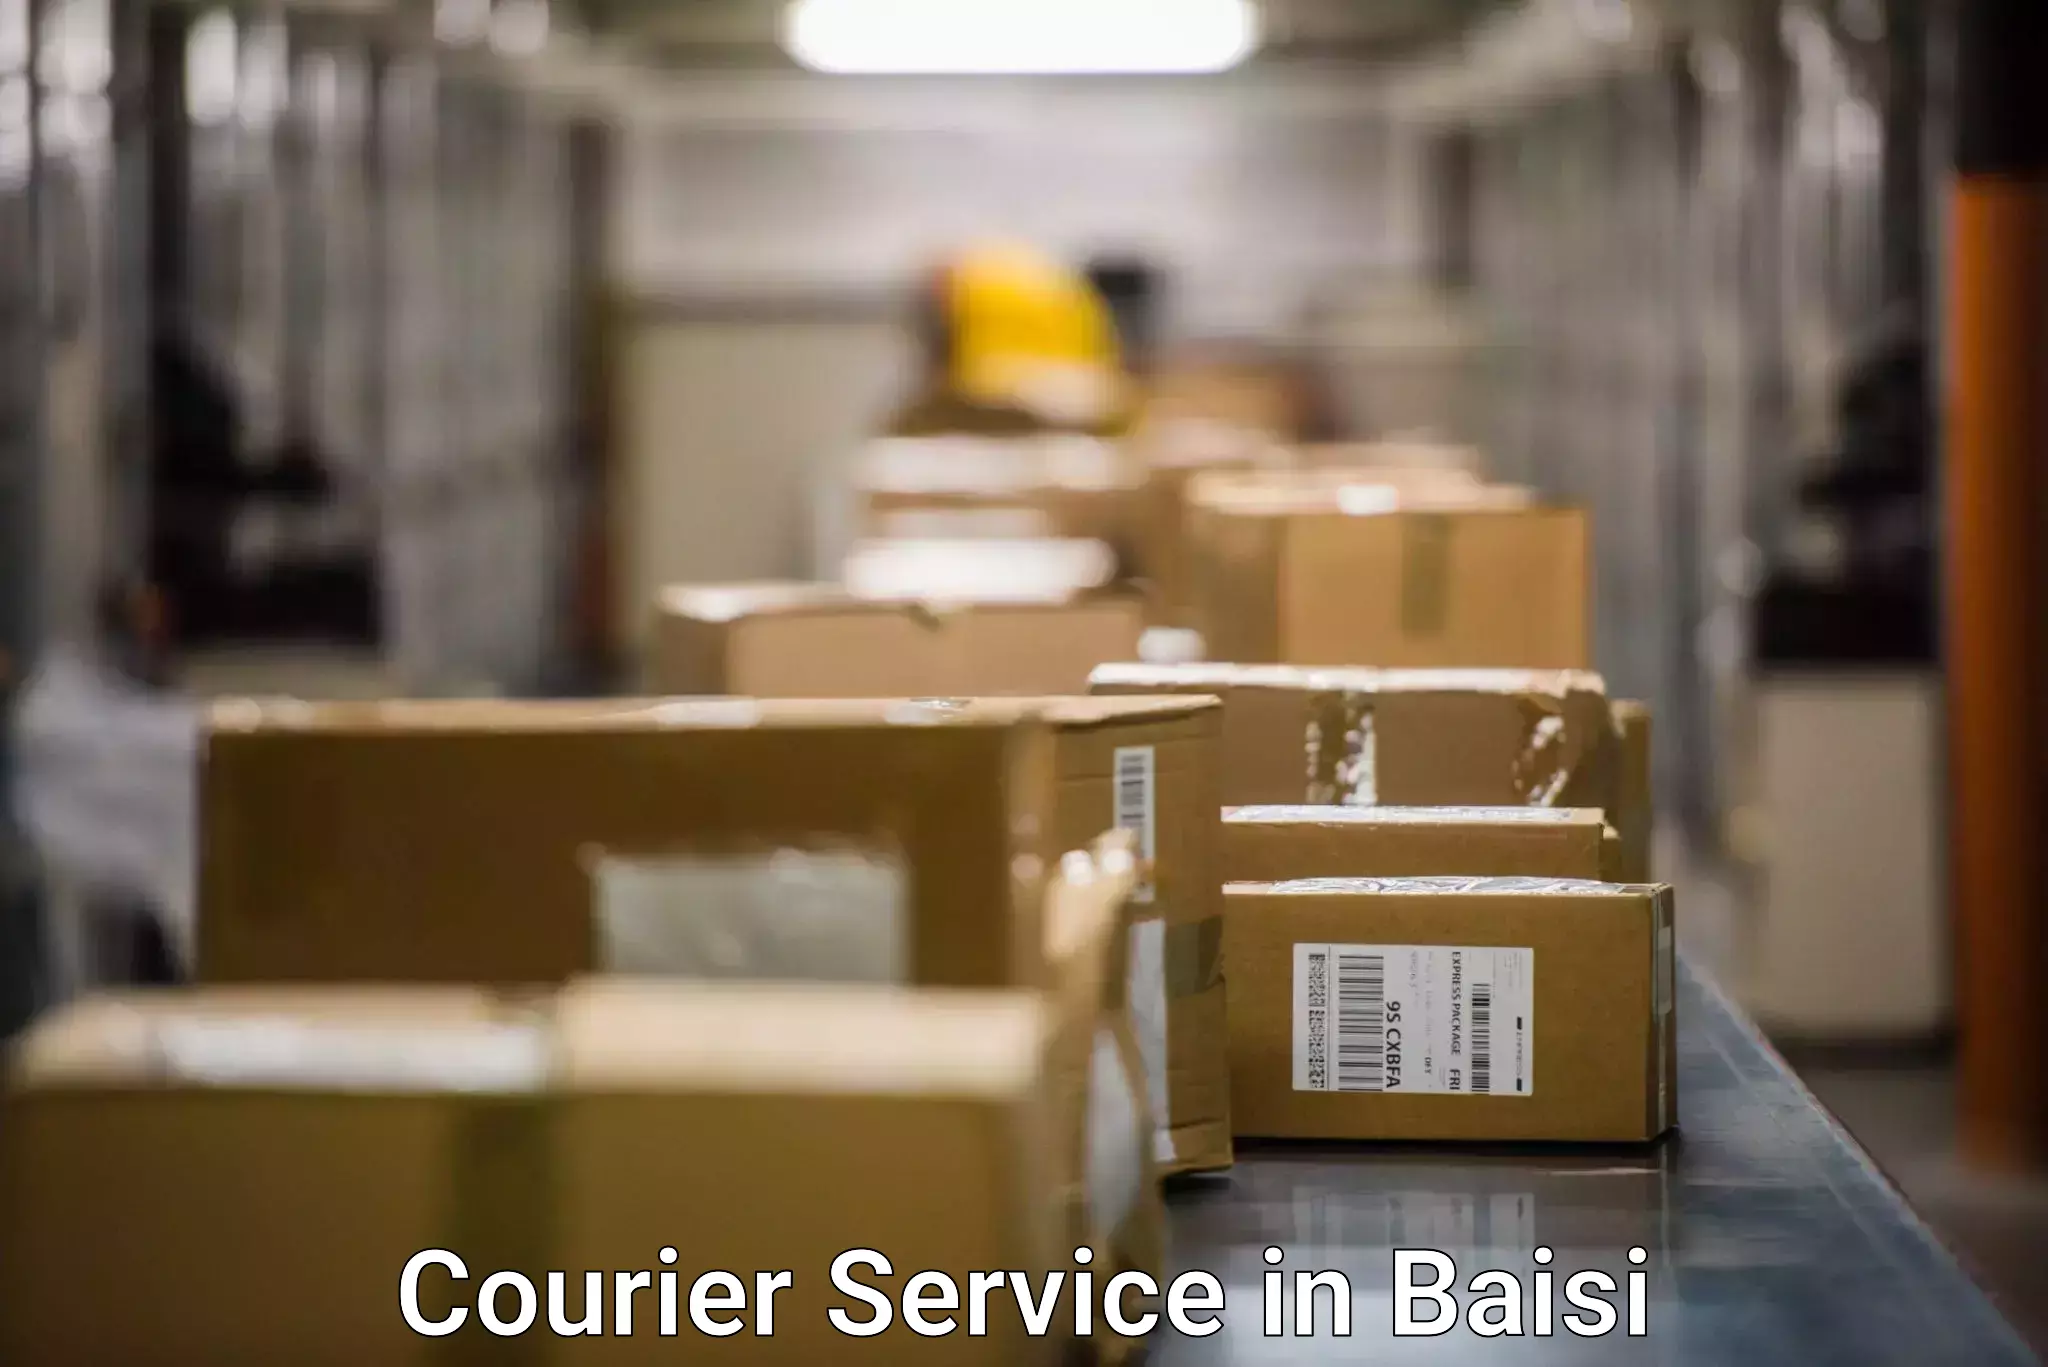 Rapid freight solutions in Baisi